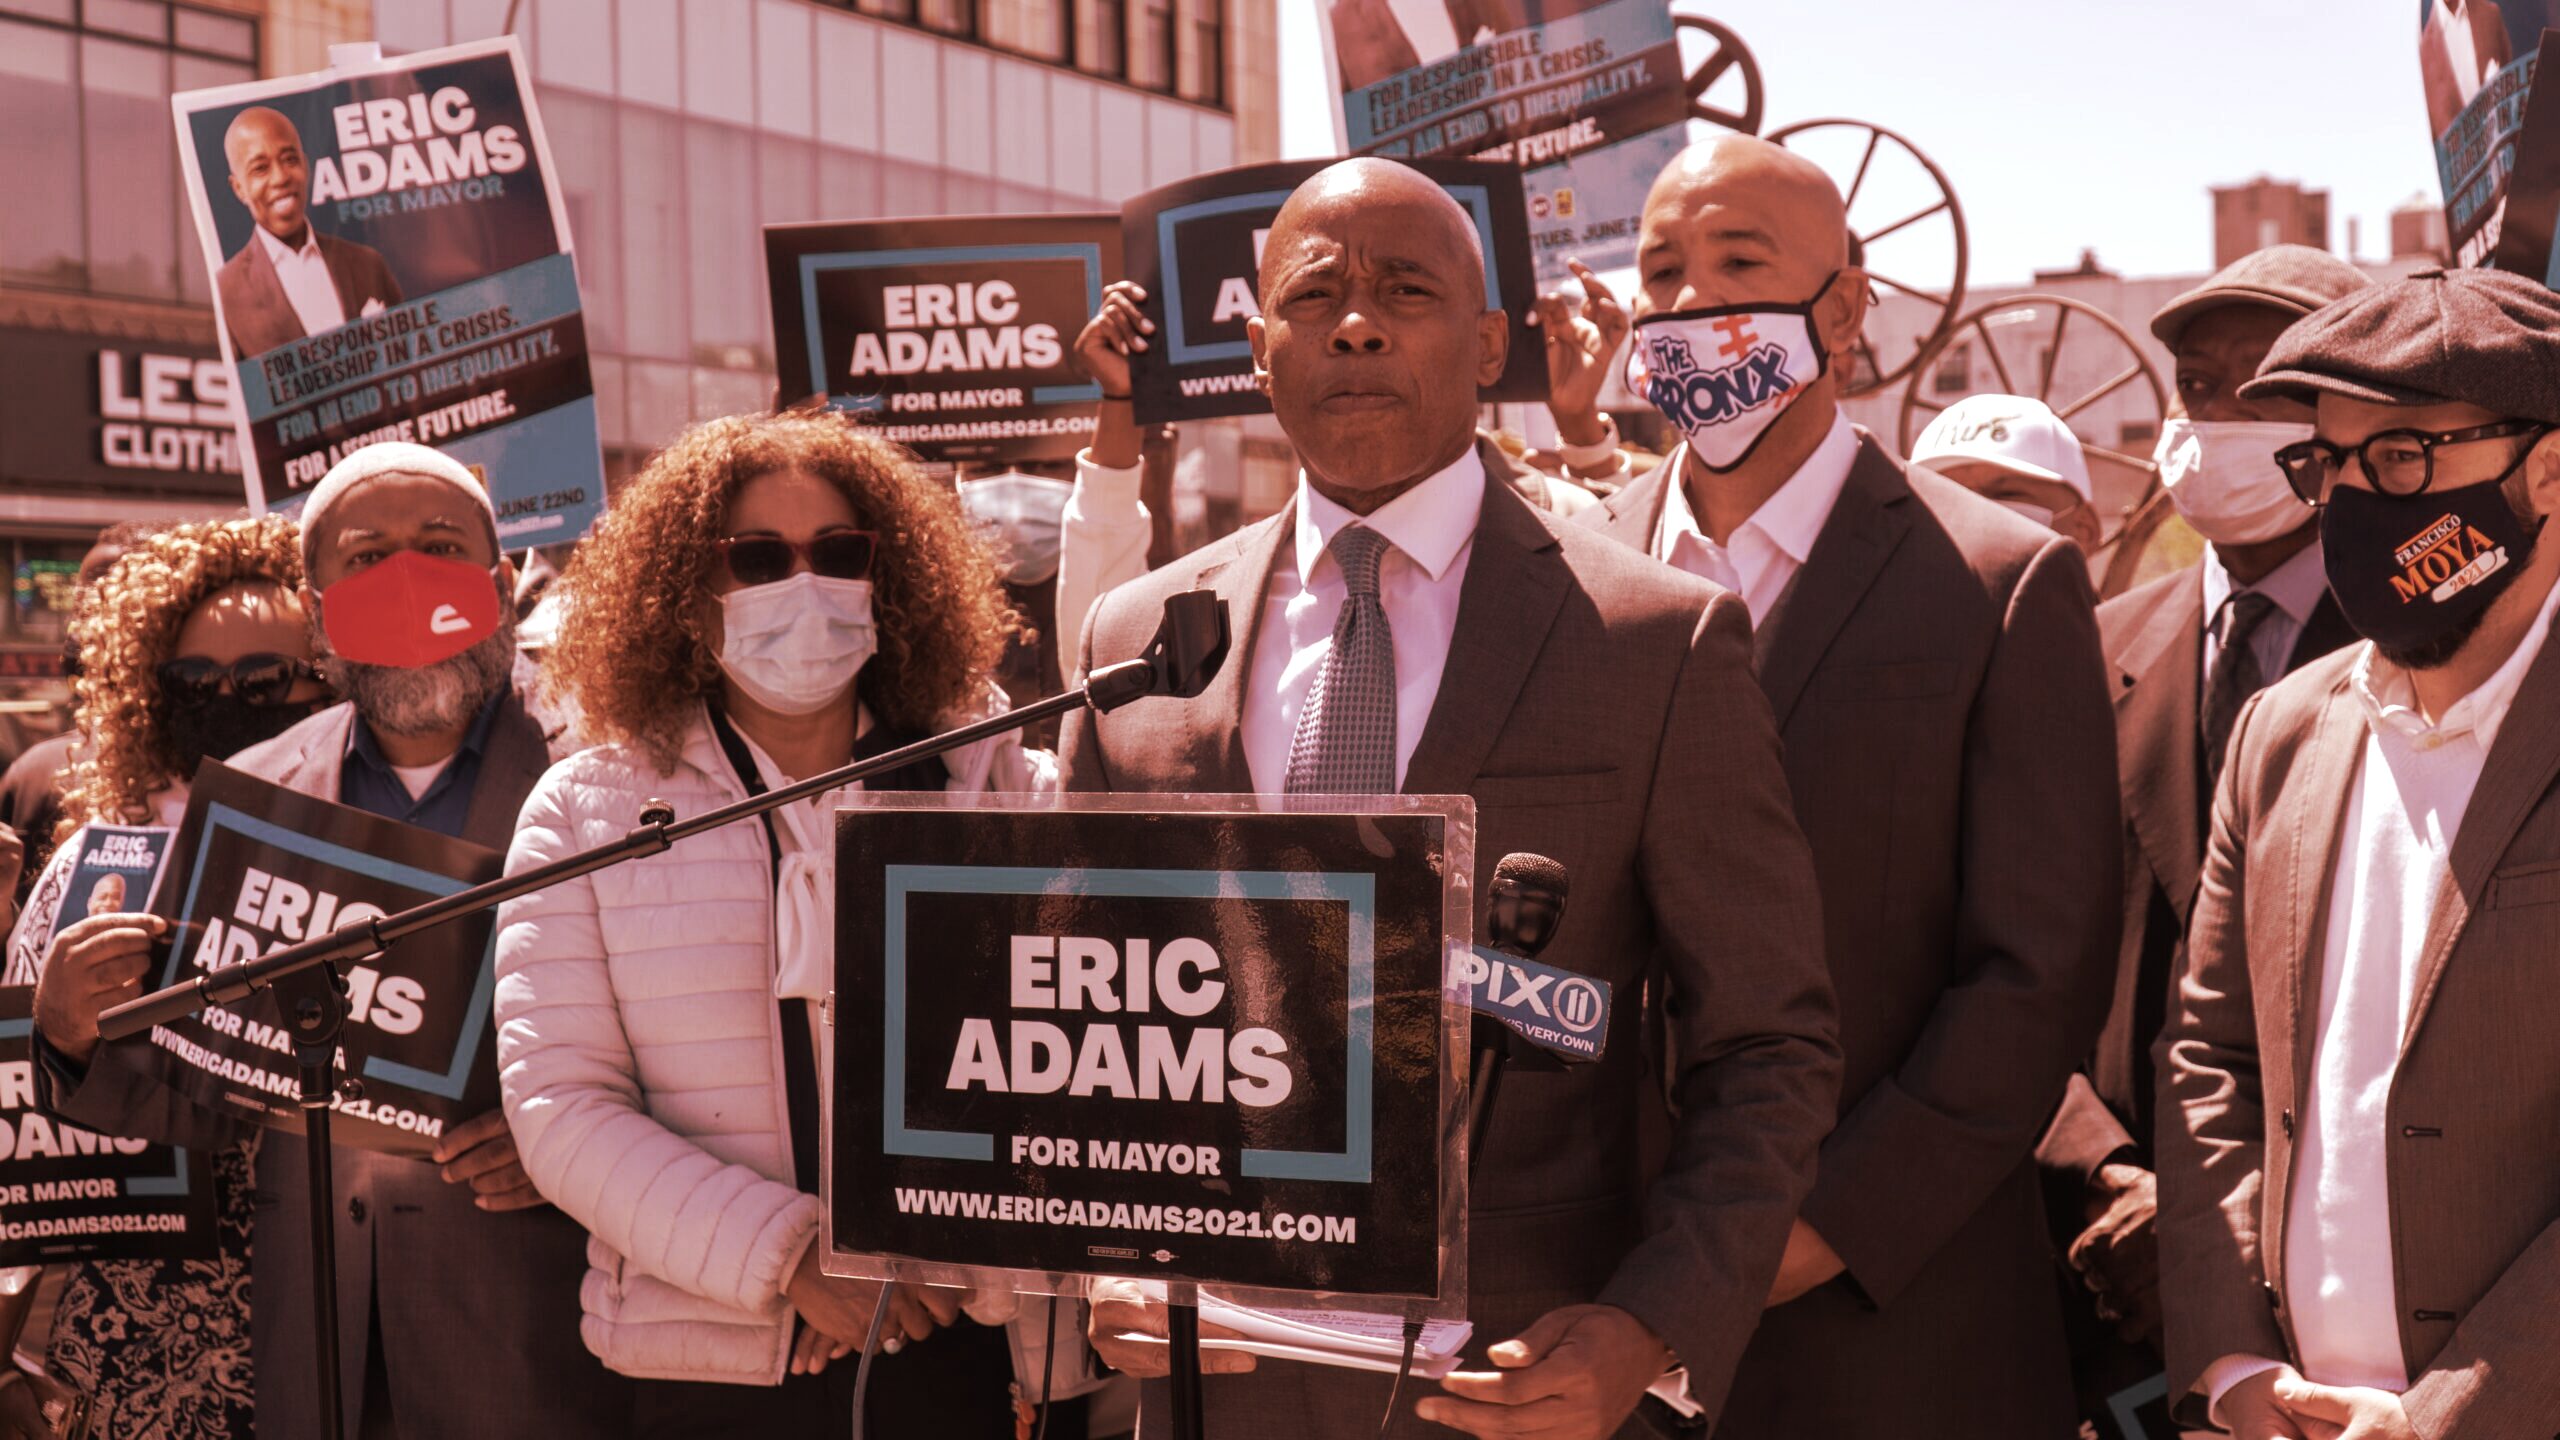 Eric Adams is poised to become the next mayor of New York City. Image: Shutterstock